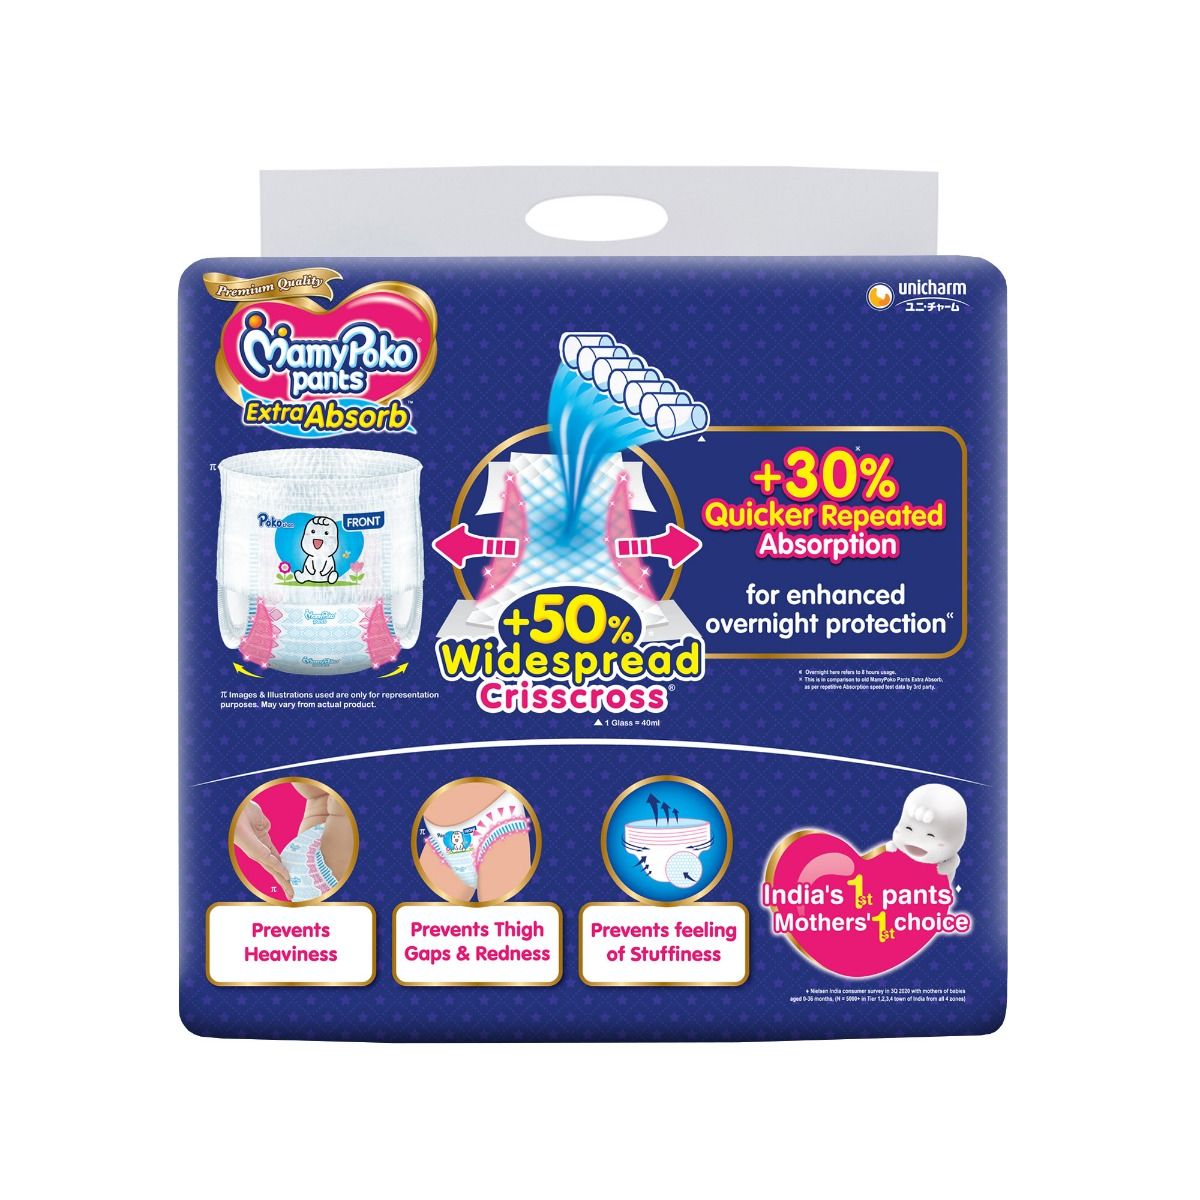 MamyPoko Extra Absorb Diaper Pants Medium, 72 Count, Pack of 1 